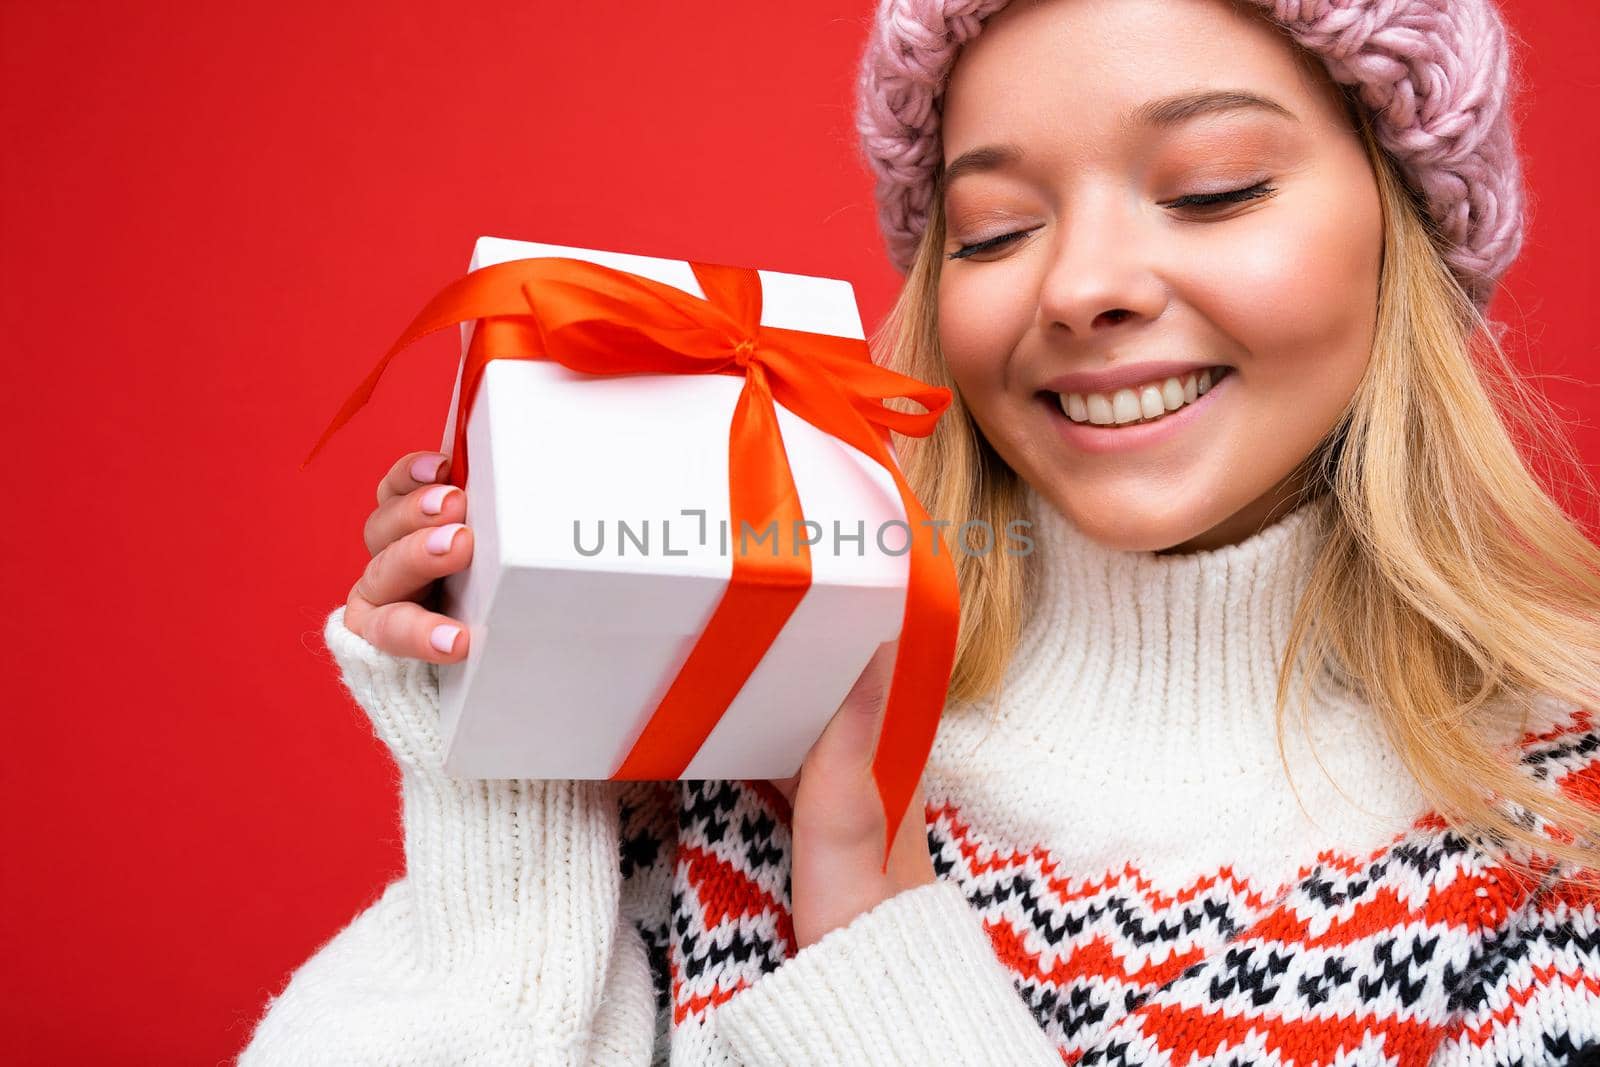 Portrait photo shot of beautiful happy smiling young blonde woman isolated over red background wall wearing winter sweater and pink hat holding white gift box with red ribbon and having fun.